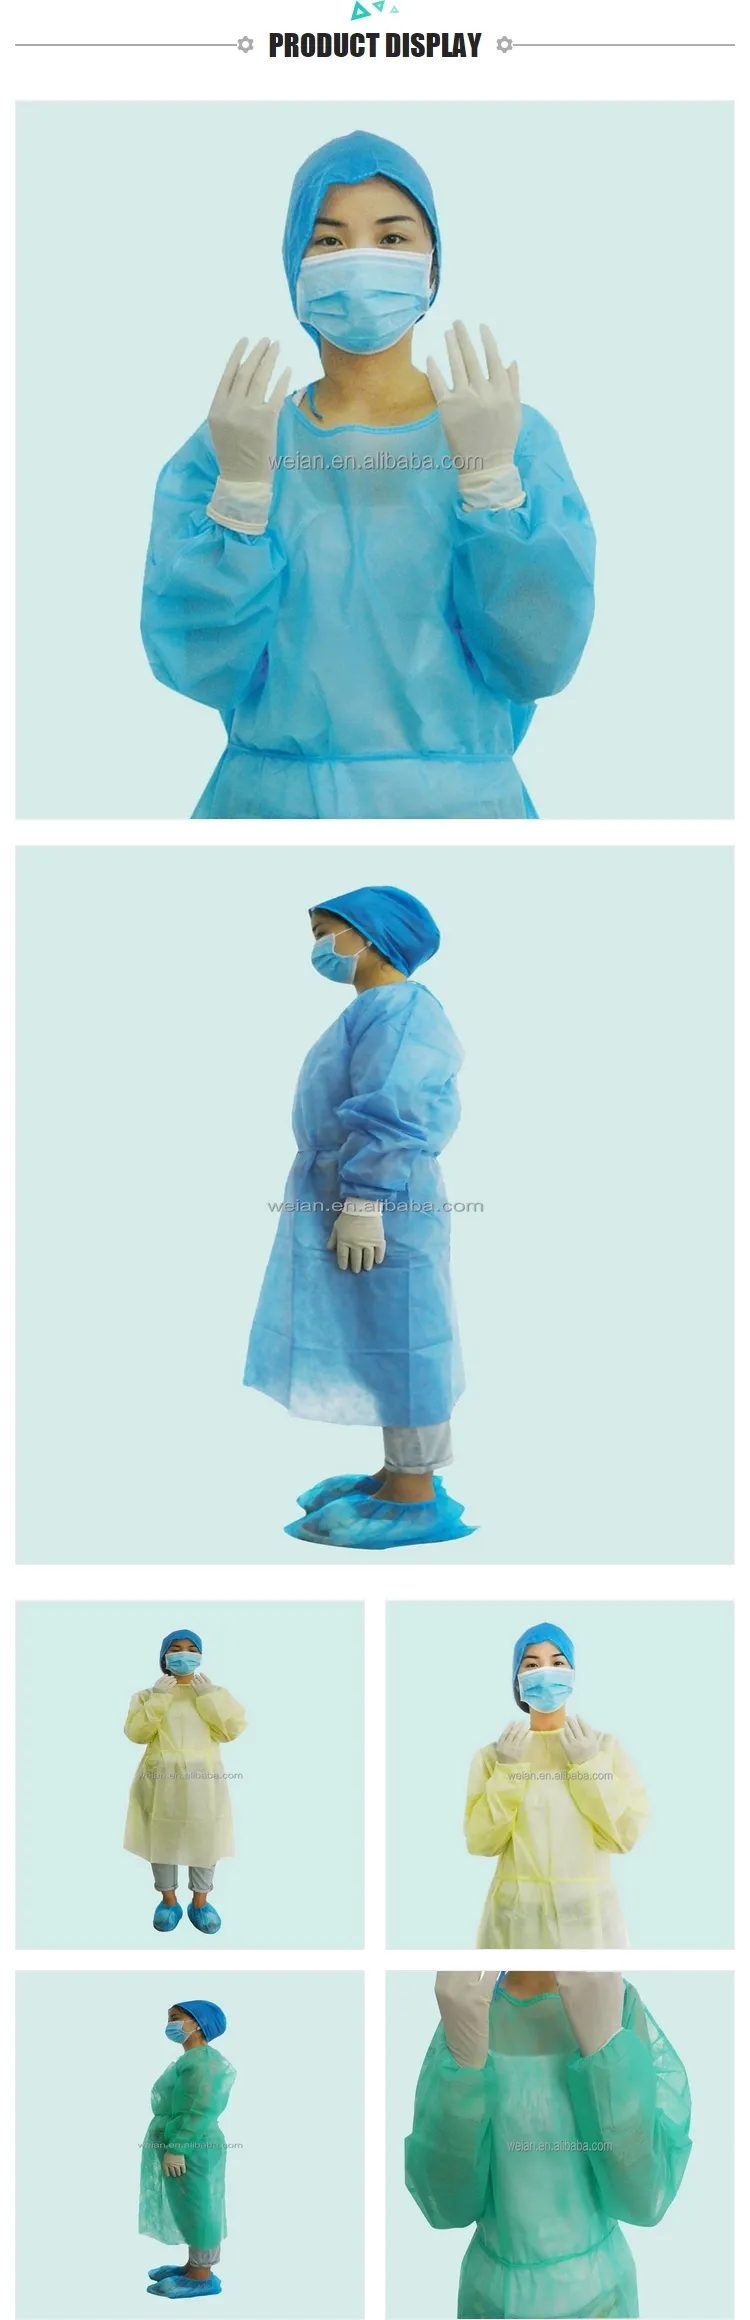 Nonwoven Clothing Light Weight Disposable Gown PPE Medical Gowns Lower Price